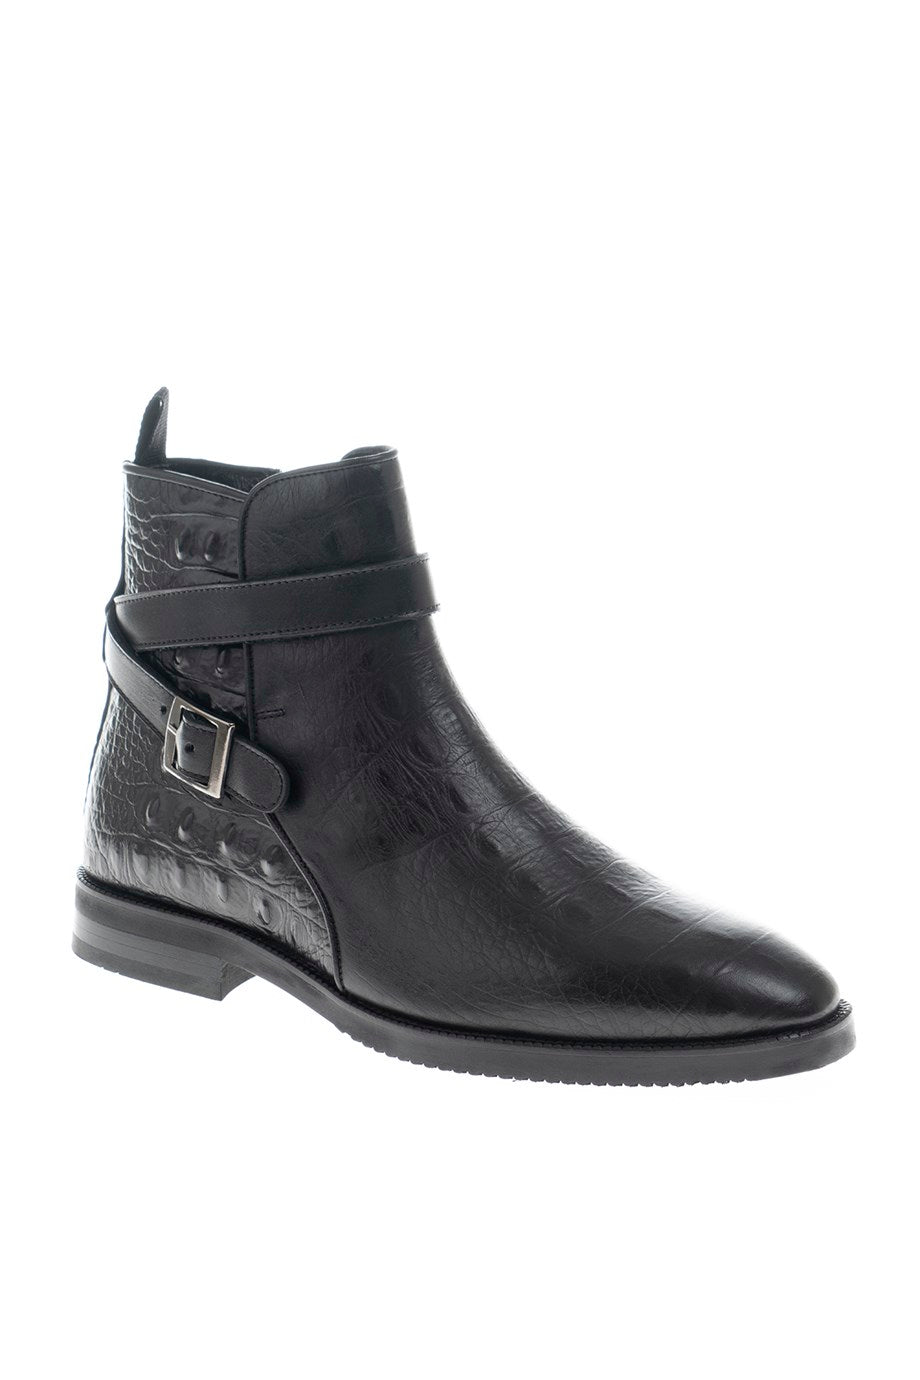 Special Design Crocodile Detail Genuine Leather Boots - MENSTYLEWITH